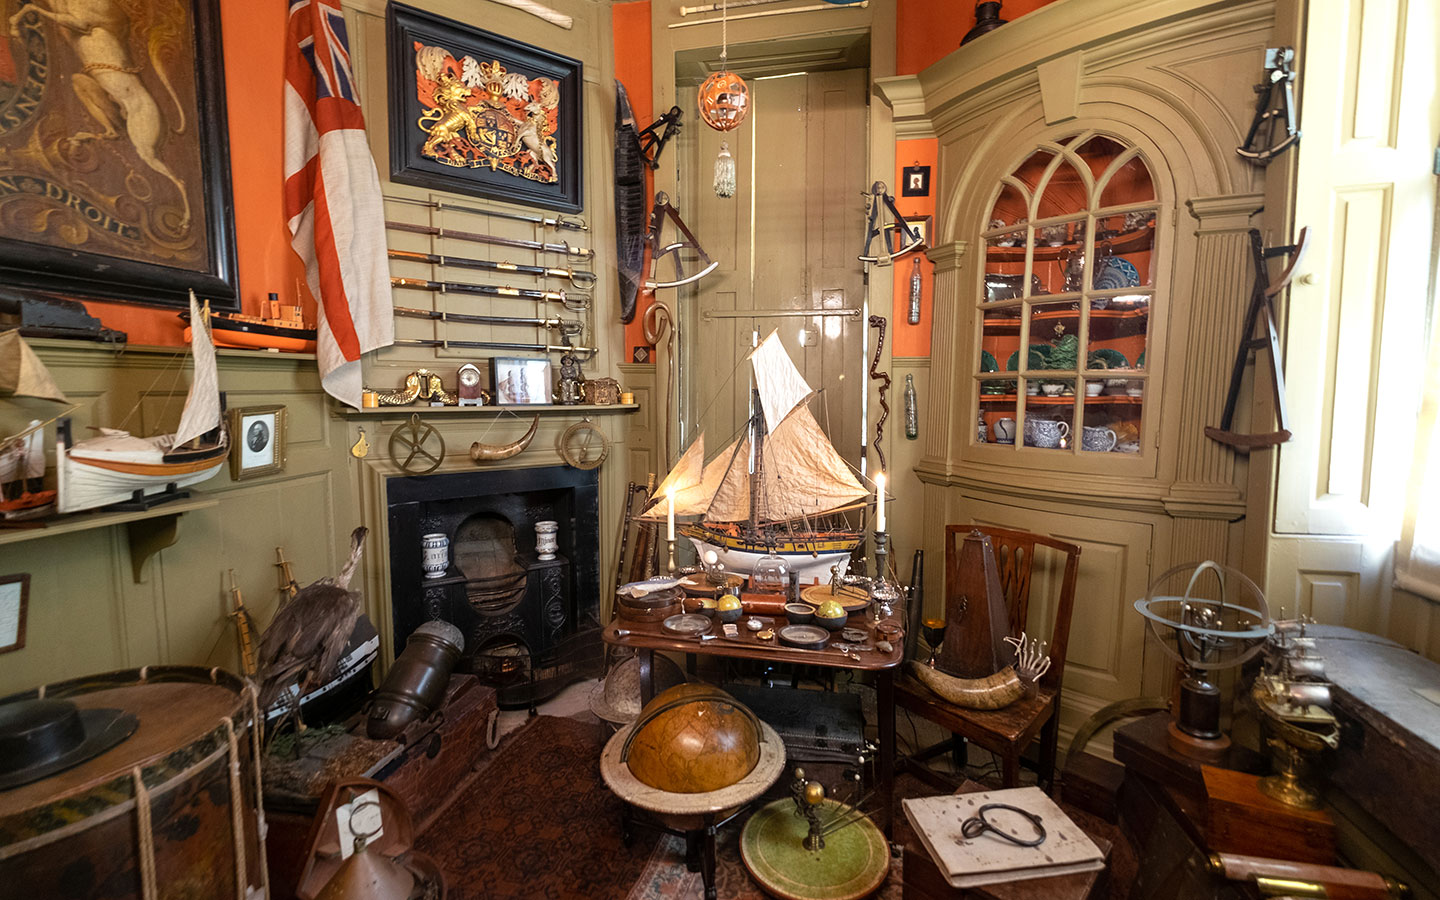 Some of Charles Paget Wade's collections at Snowshill Manor